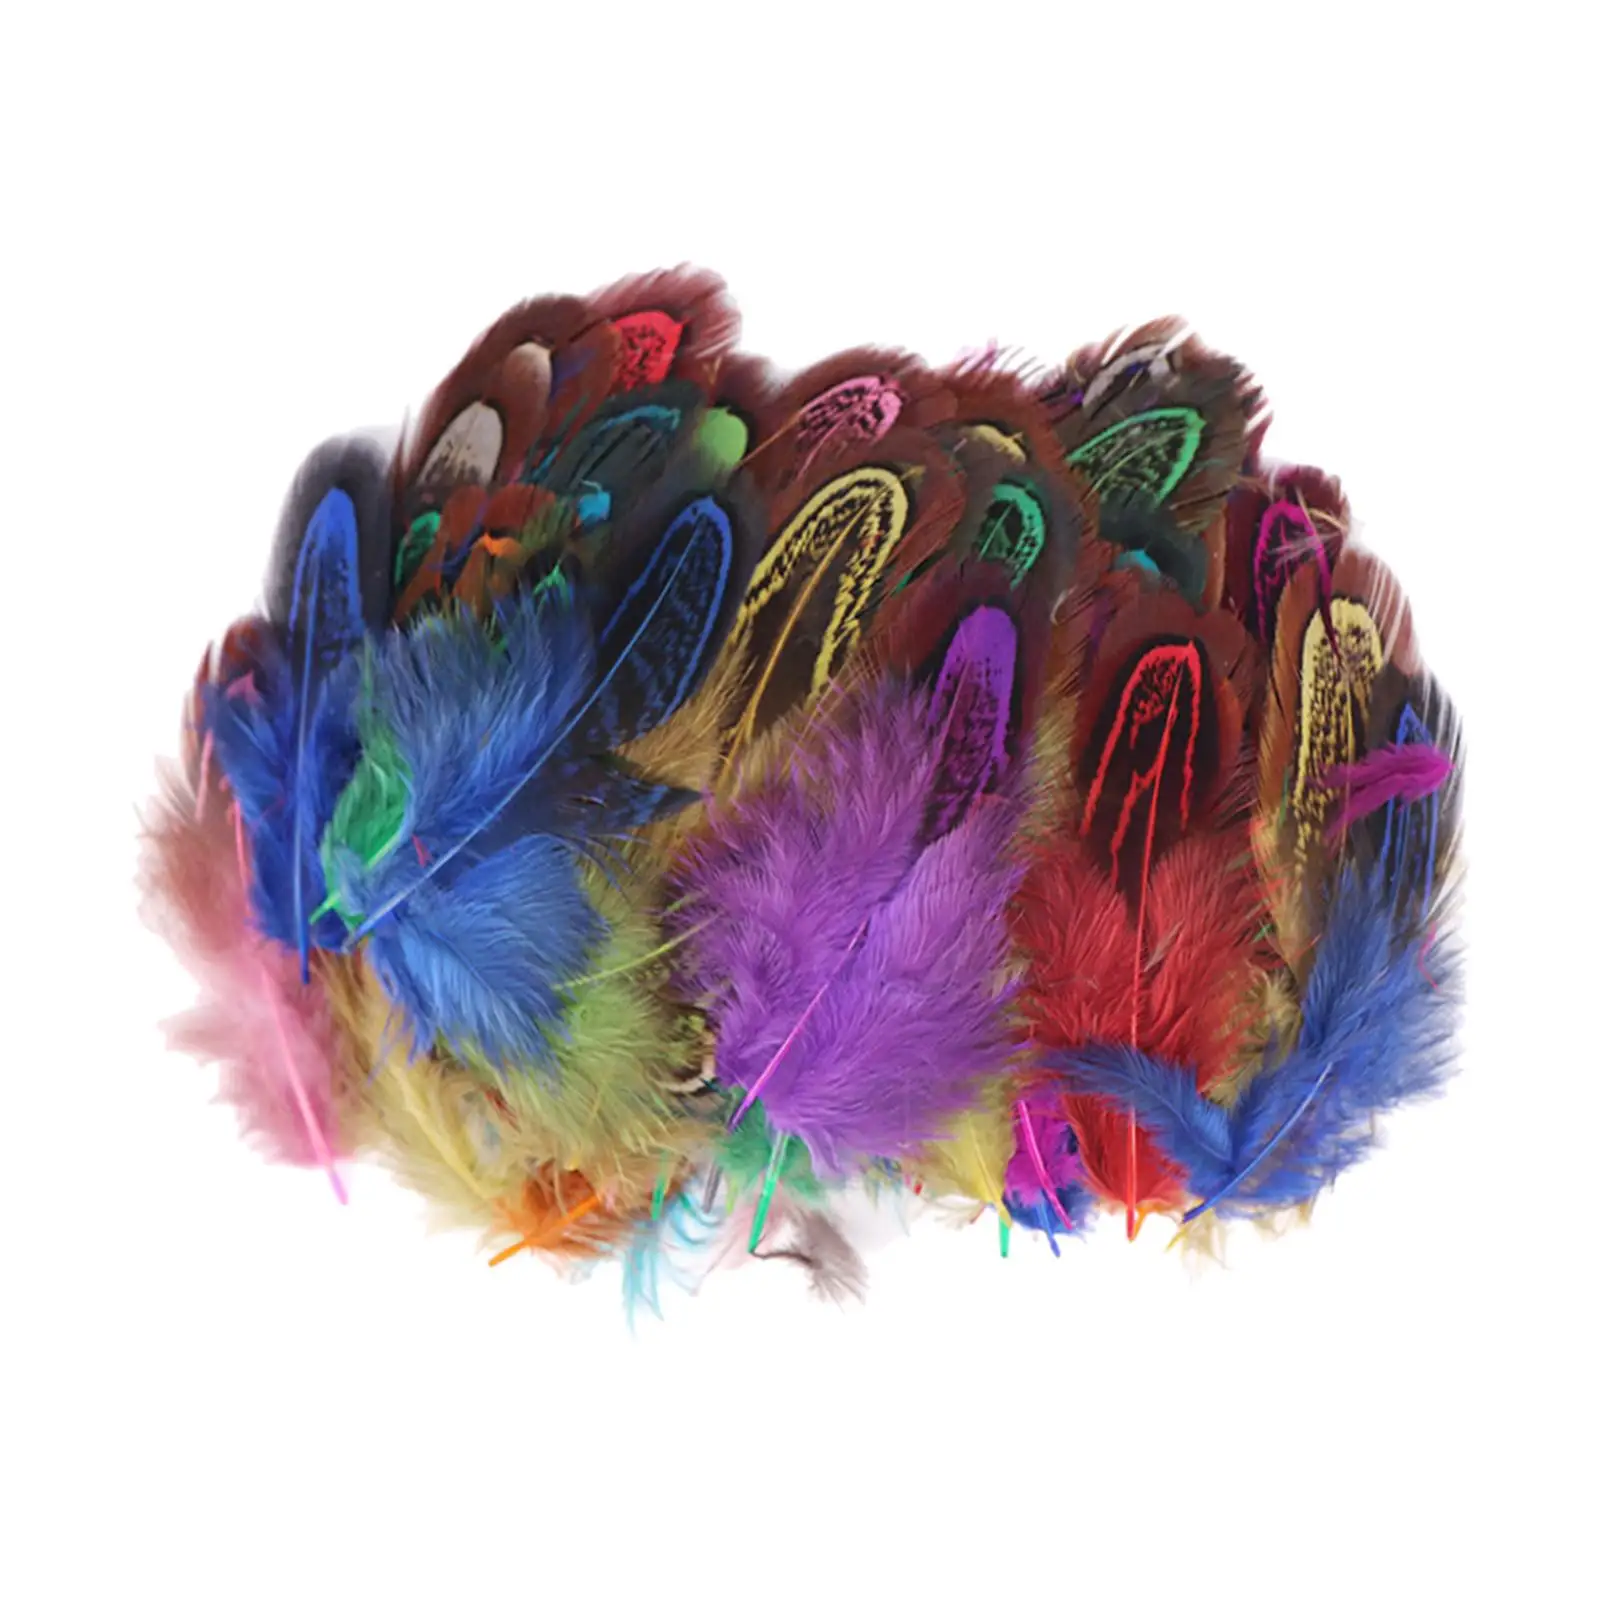 Fringemings,  Feathers,   Feathers, Fringemings, Sewing Tape, Feathers, Dress, Accessories, Clothing, Decoration